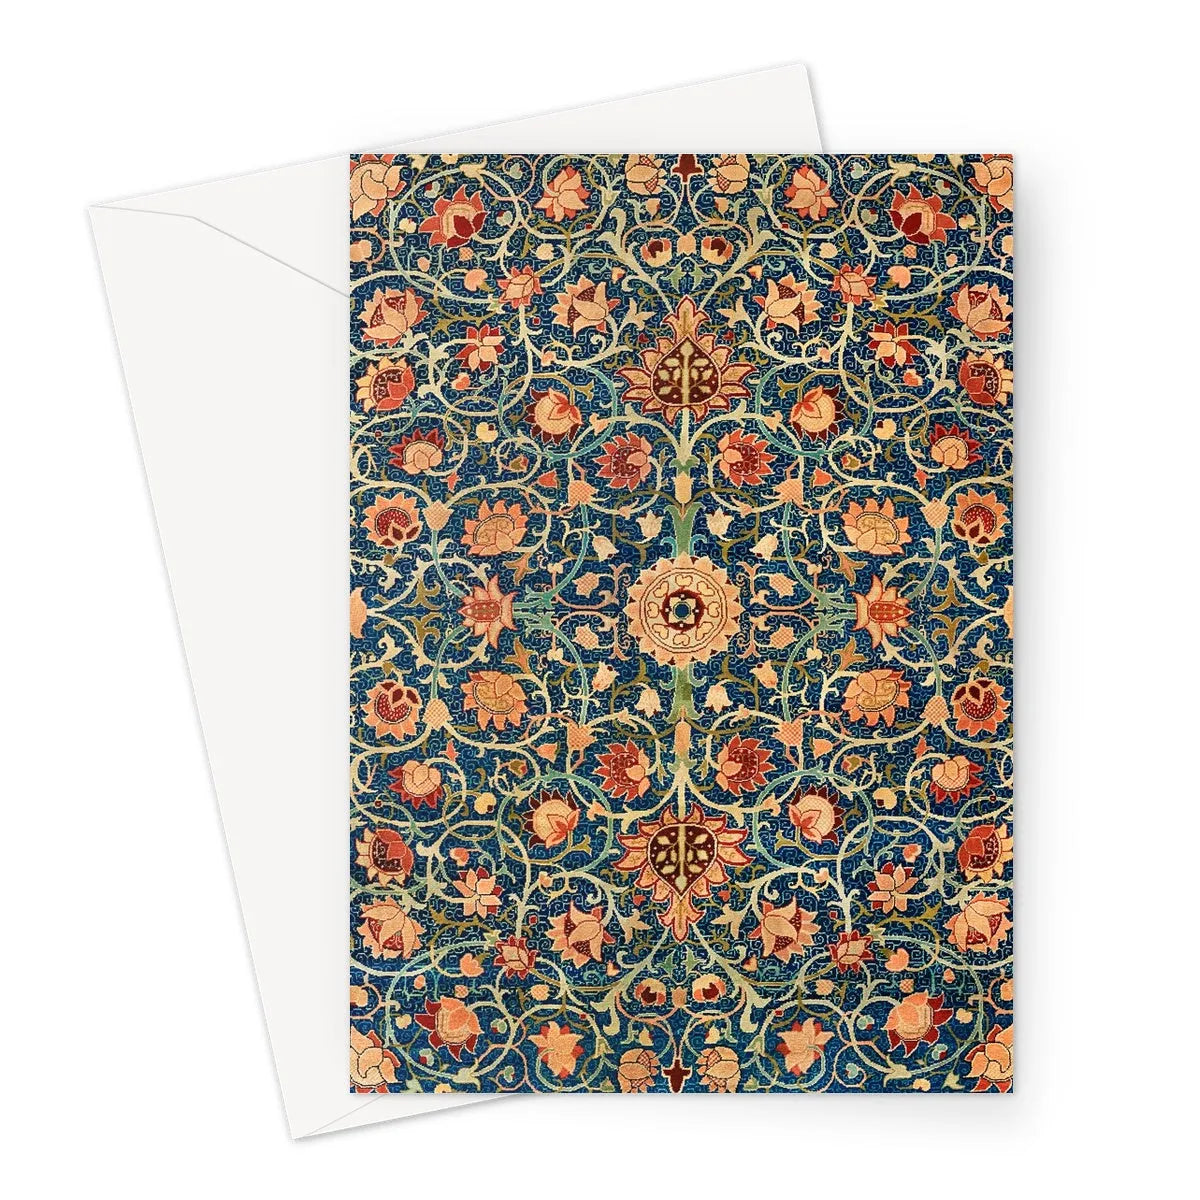 Holland Park Carpet By William Morris Greeting Card - A5 Portrait / 10 Cards - Greeting & Note Cards - Aesthetic Art